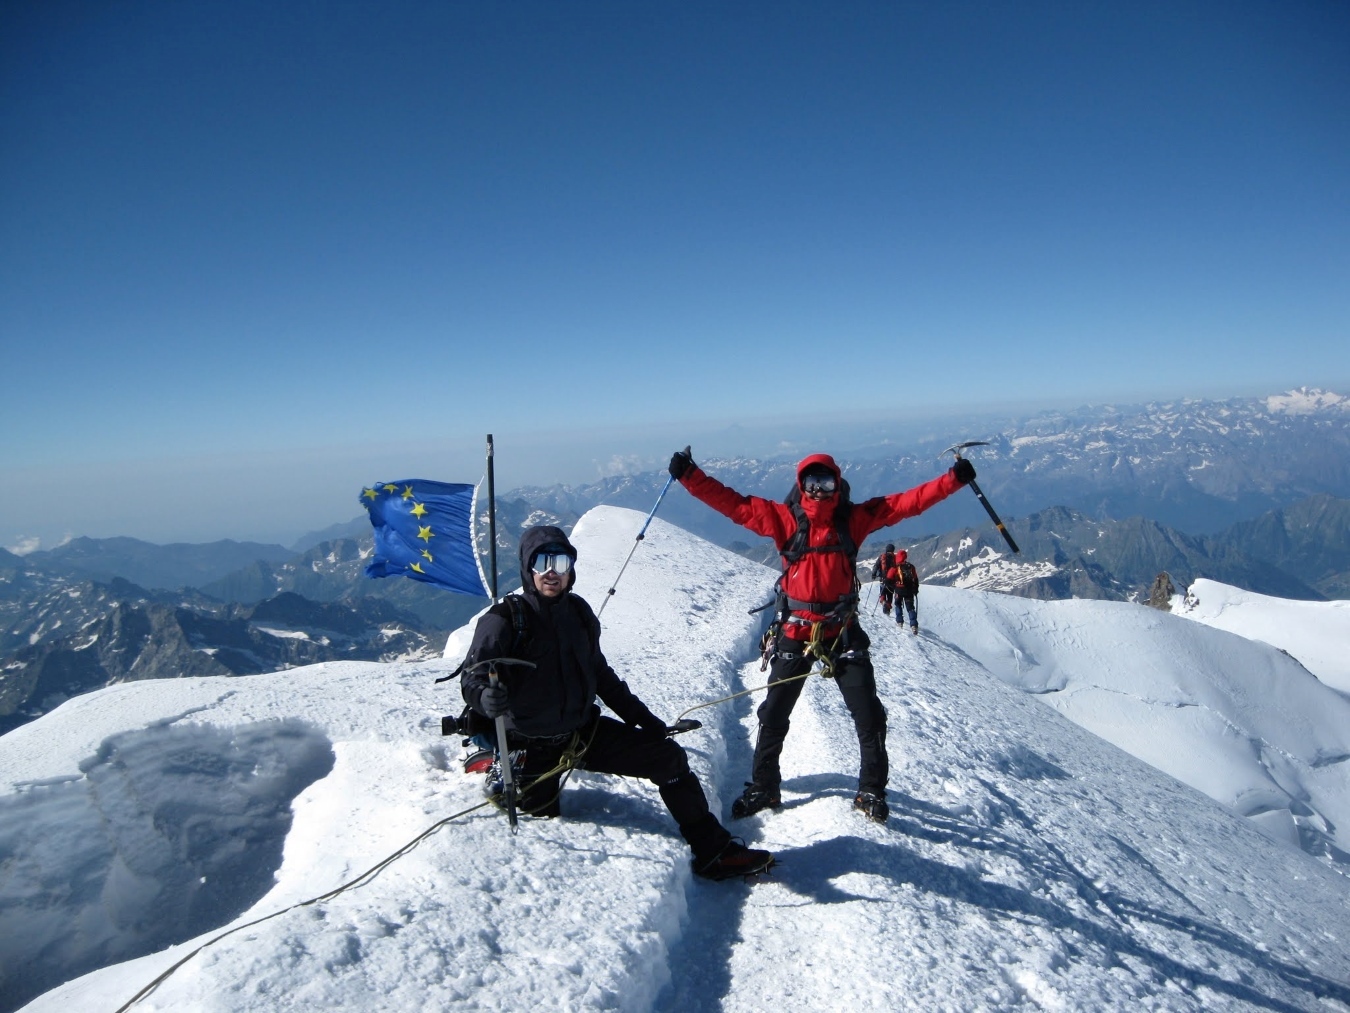 Two climbers on the summit of Signalkuppe, Monte Rosa region.